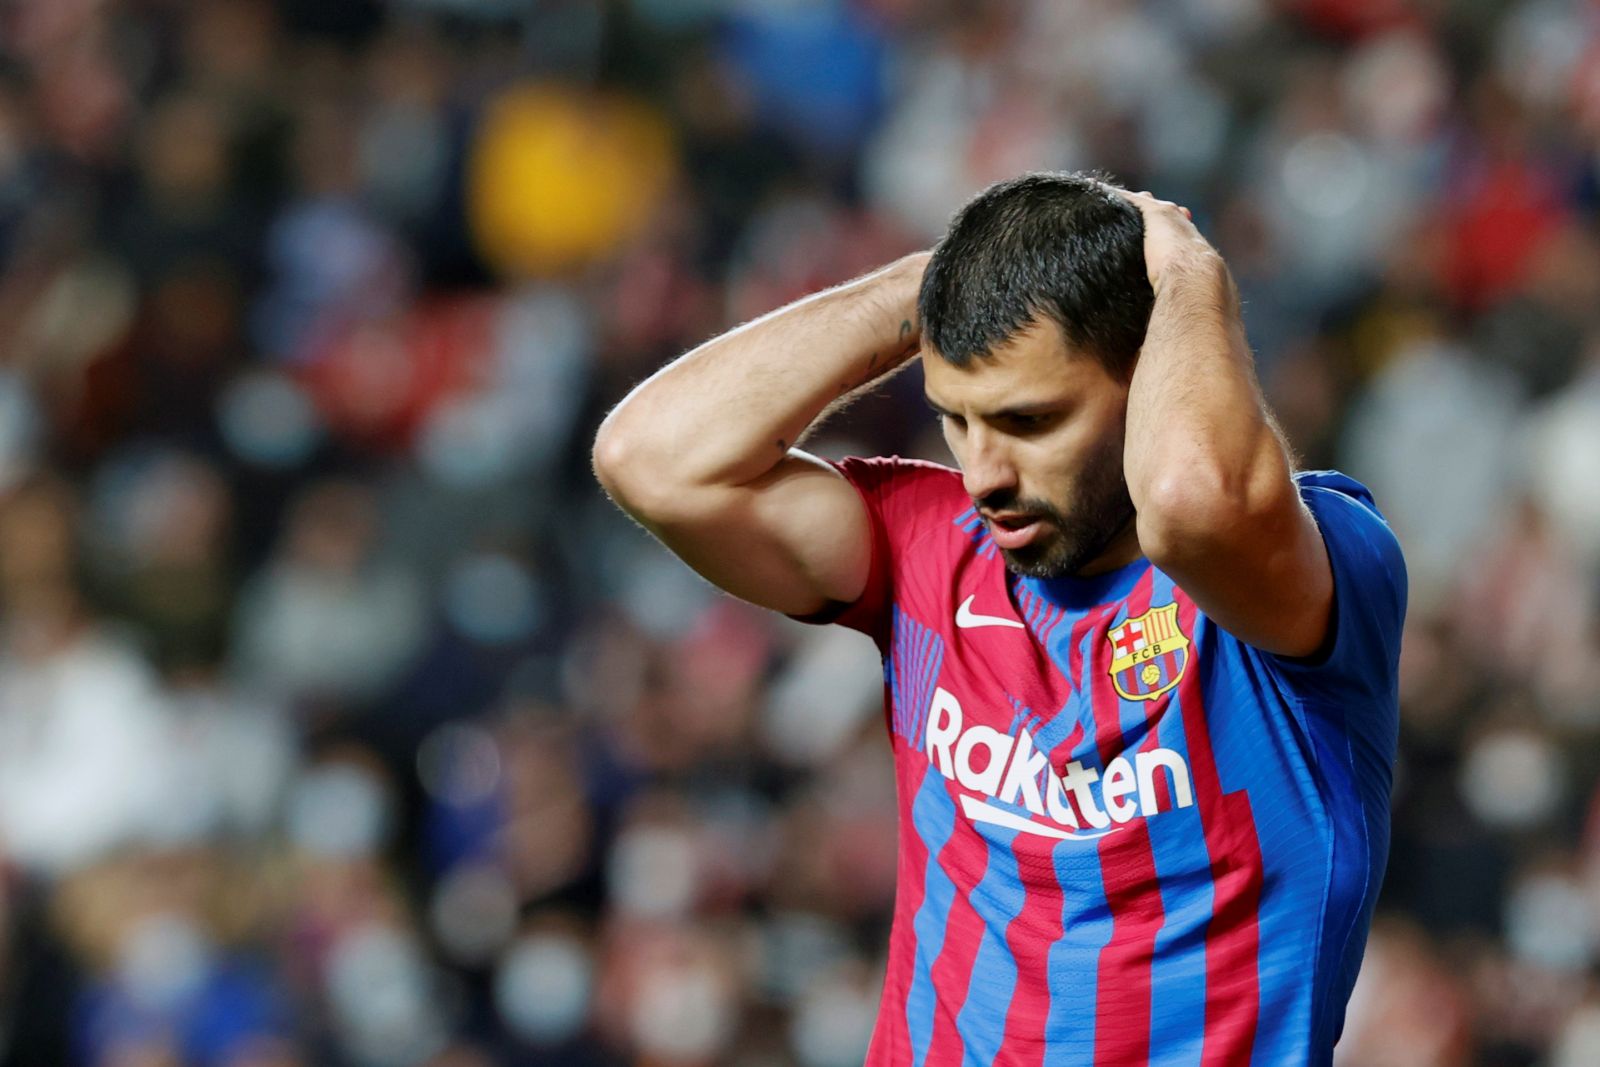 epa09558244 (FILE) - Barcelona's Argentinian striker Sergio 'Kun' Aguero reacts during the Spanish LaLiga soccer match between Rayo Vallecano and FC Barcelona at Estadio de Vallecas stadium in Madrid, Spain, 27 October 2021 (re-issued on 01 November 2021). Barcelona announced on 01 November 2021 that 'Aguero has undergone a diagnostic and therapeutic procedure and during the next three months the effectiveness of the treatment will be evaluated to determine his recovery process'.  EPA/Javier Lizon